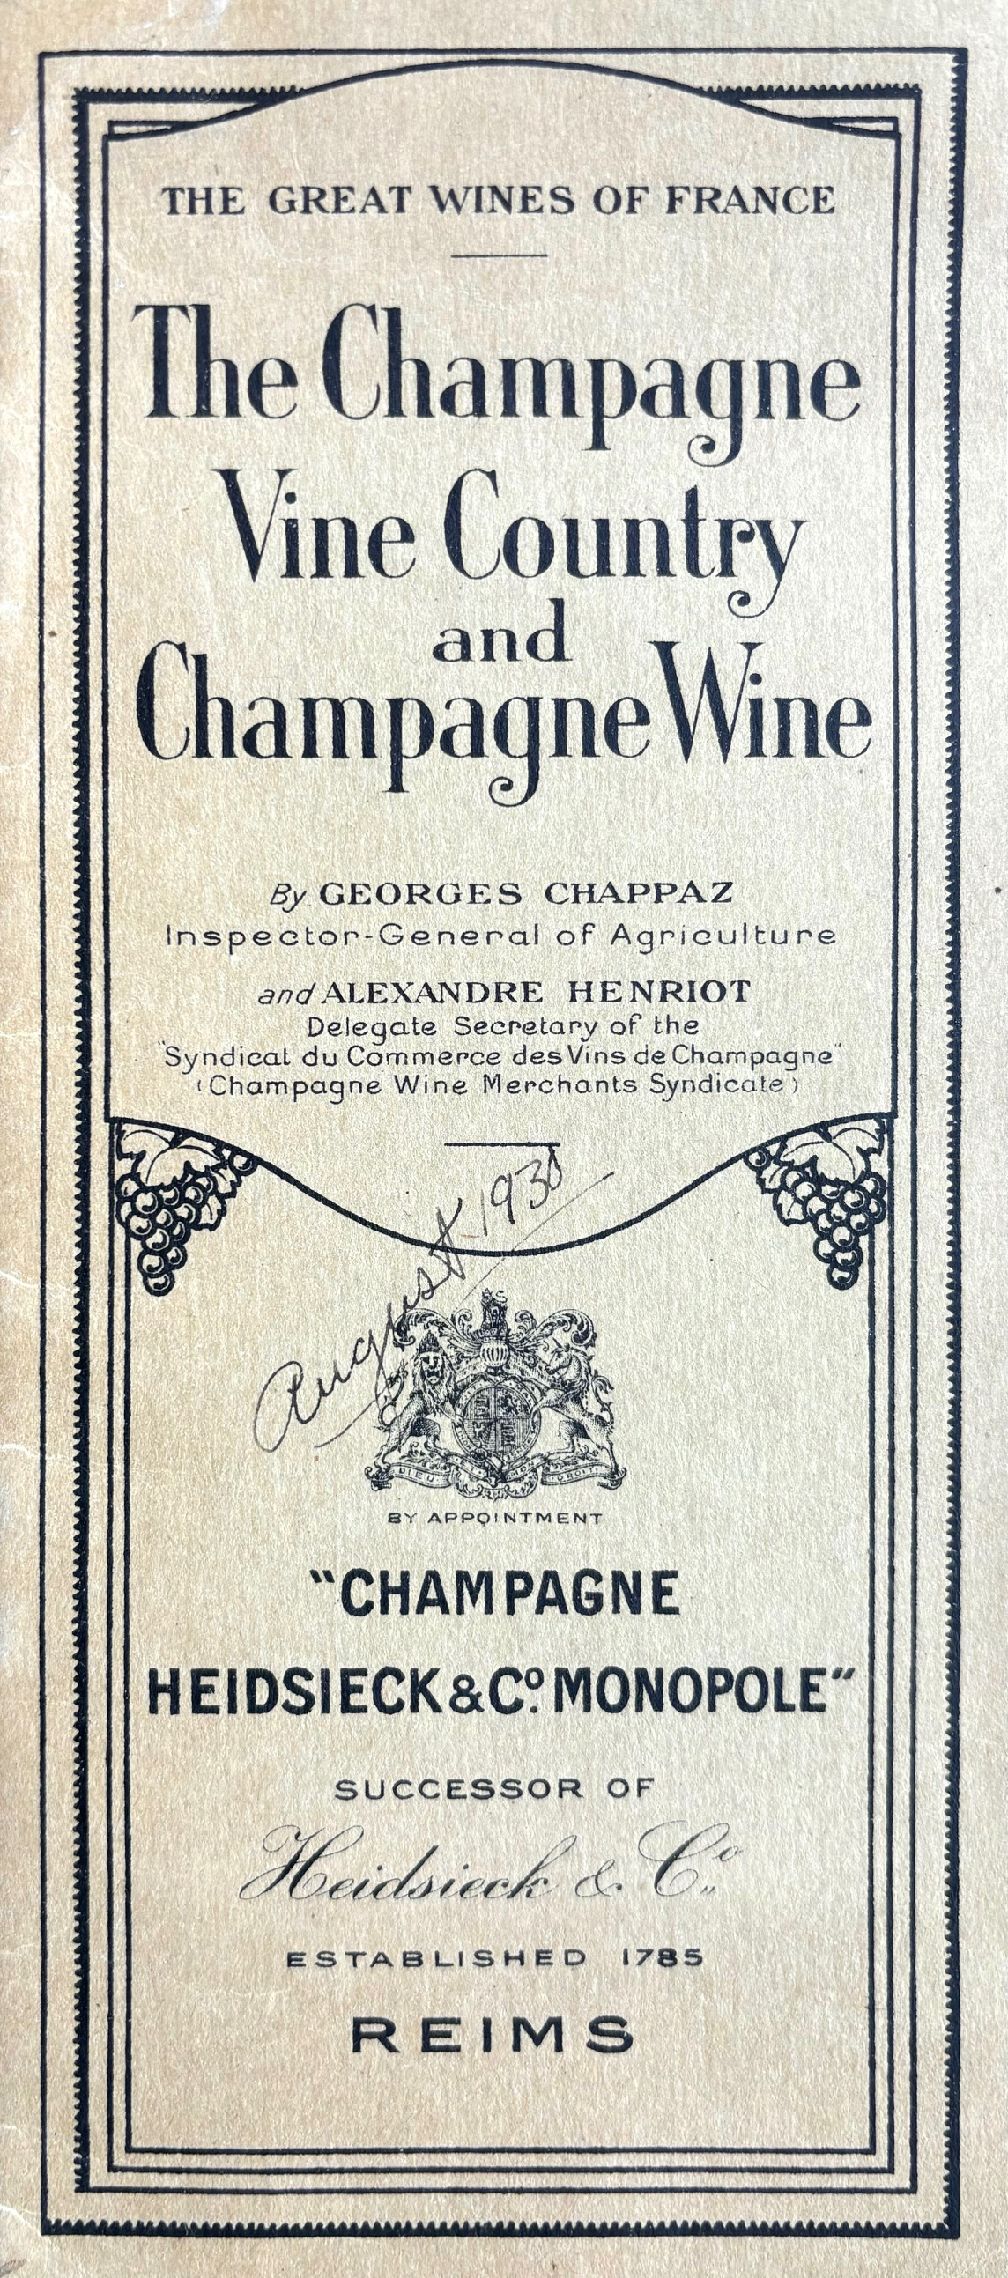 (*NEW ARRIVAL*) The Champagne Vine Country and Champagne Wine (Georges Chappaz & Alexandre Henriot)